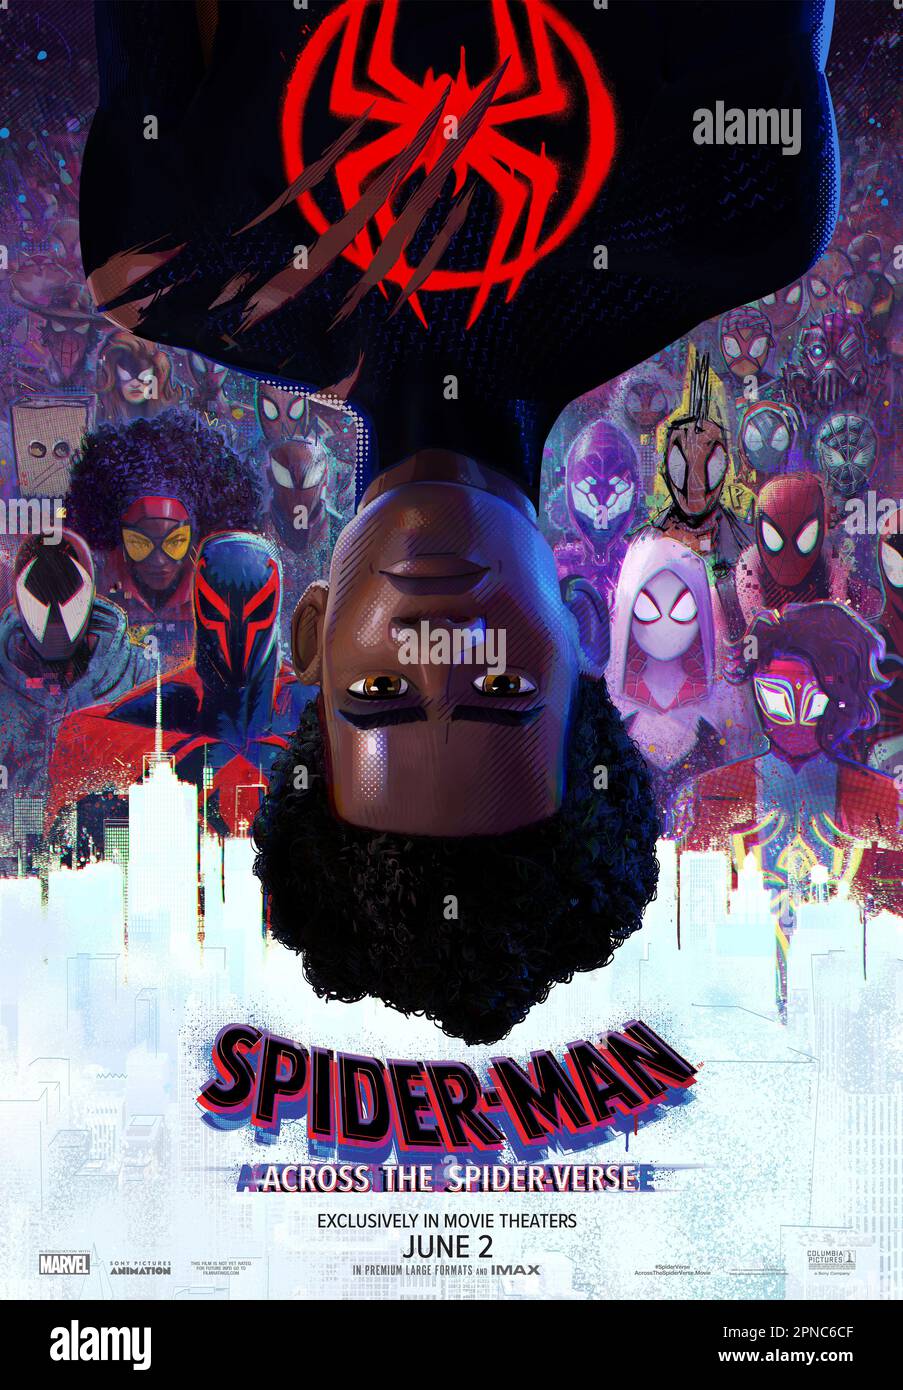 Spider-Man Across the Spider-Verse poster Stock Photo